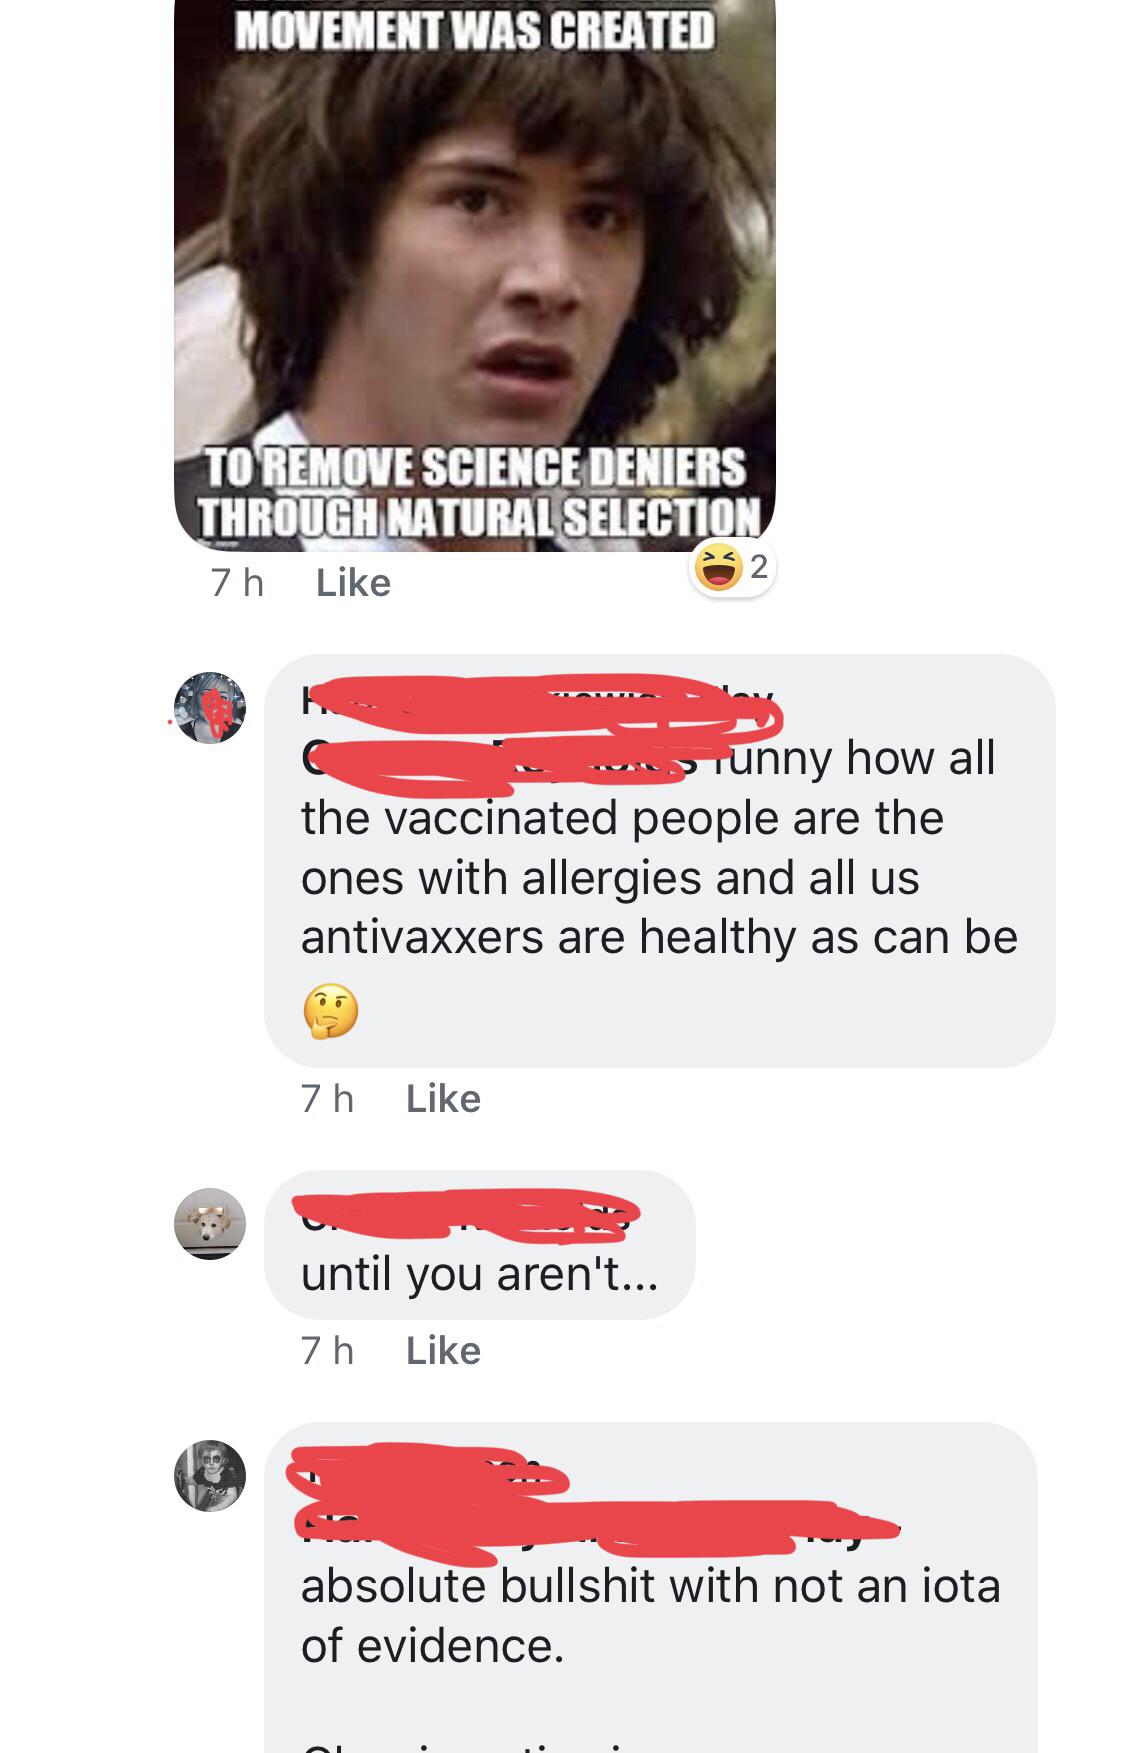 jaw - Movement Was Created To Remove Science Deniers Through Natural Selection 7h F unny how all the vaccinated people are the ones with allergies and all us antivaxxers are healthy as can be 7 h until you aren't... 7h absolute bullshit with not an iota o